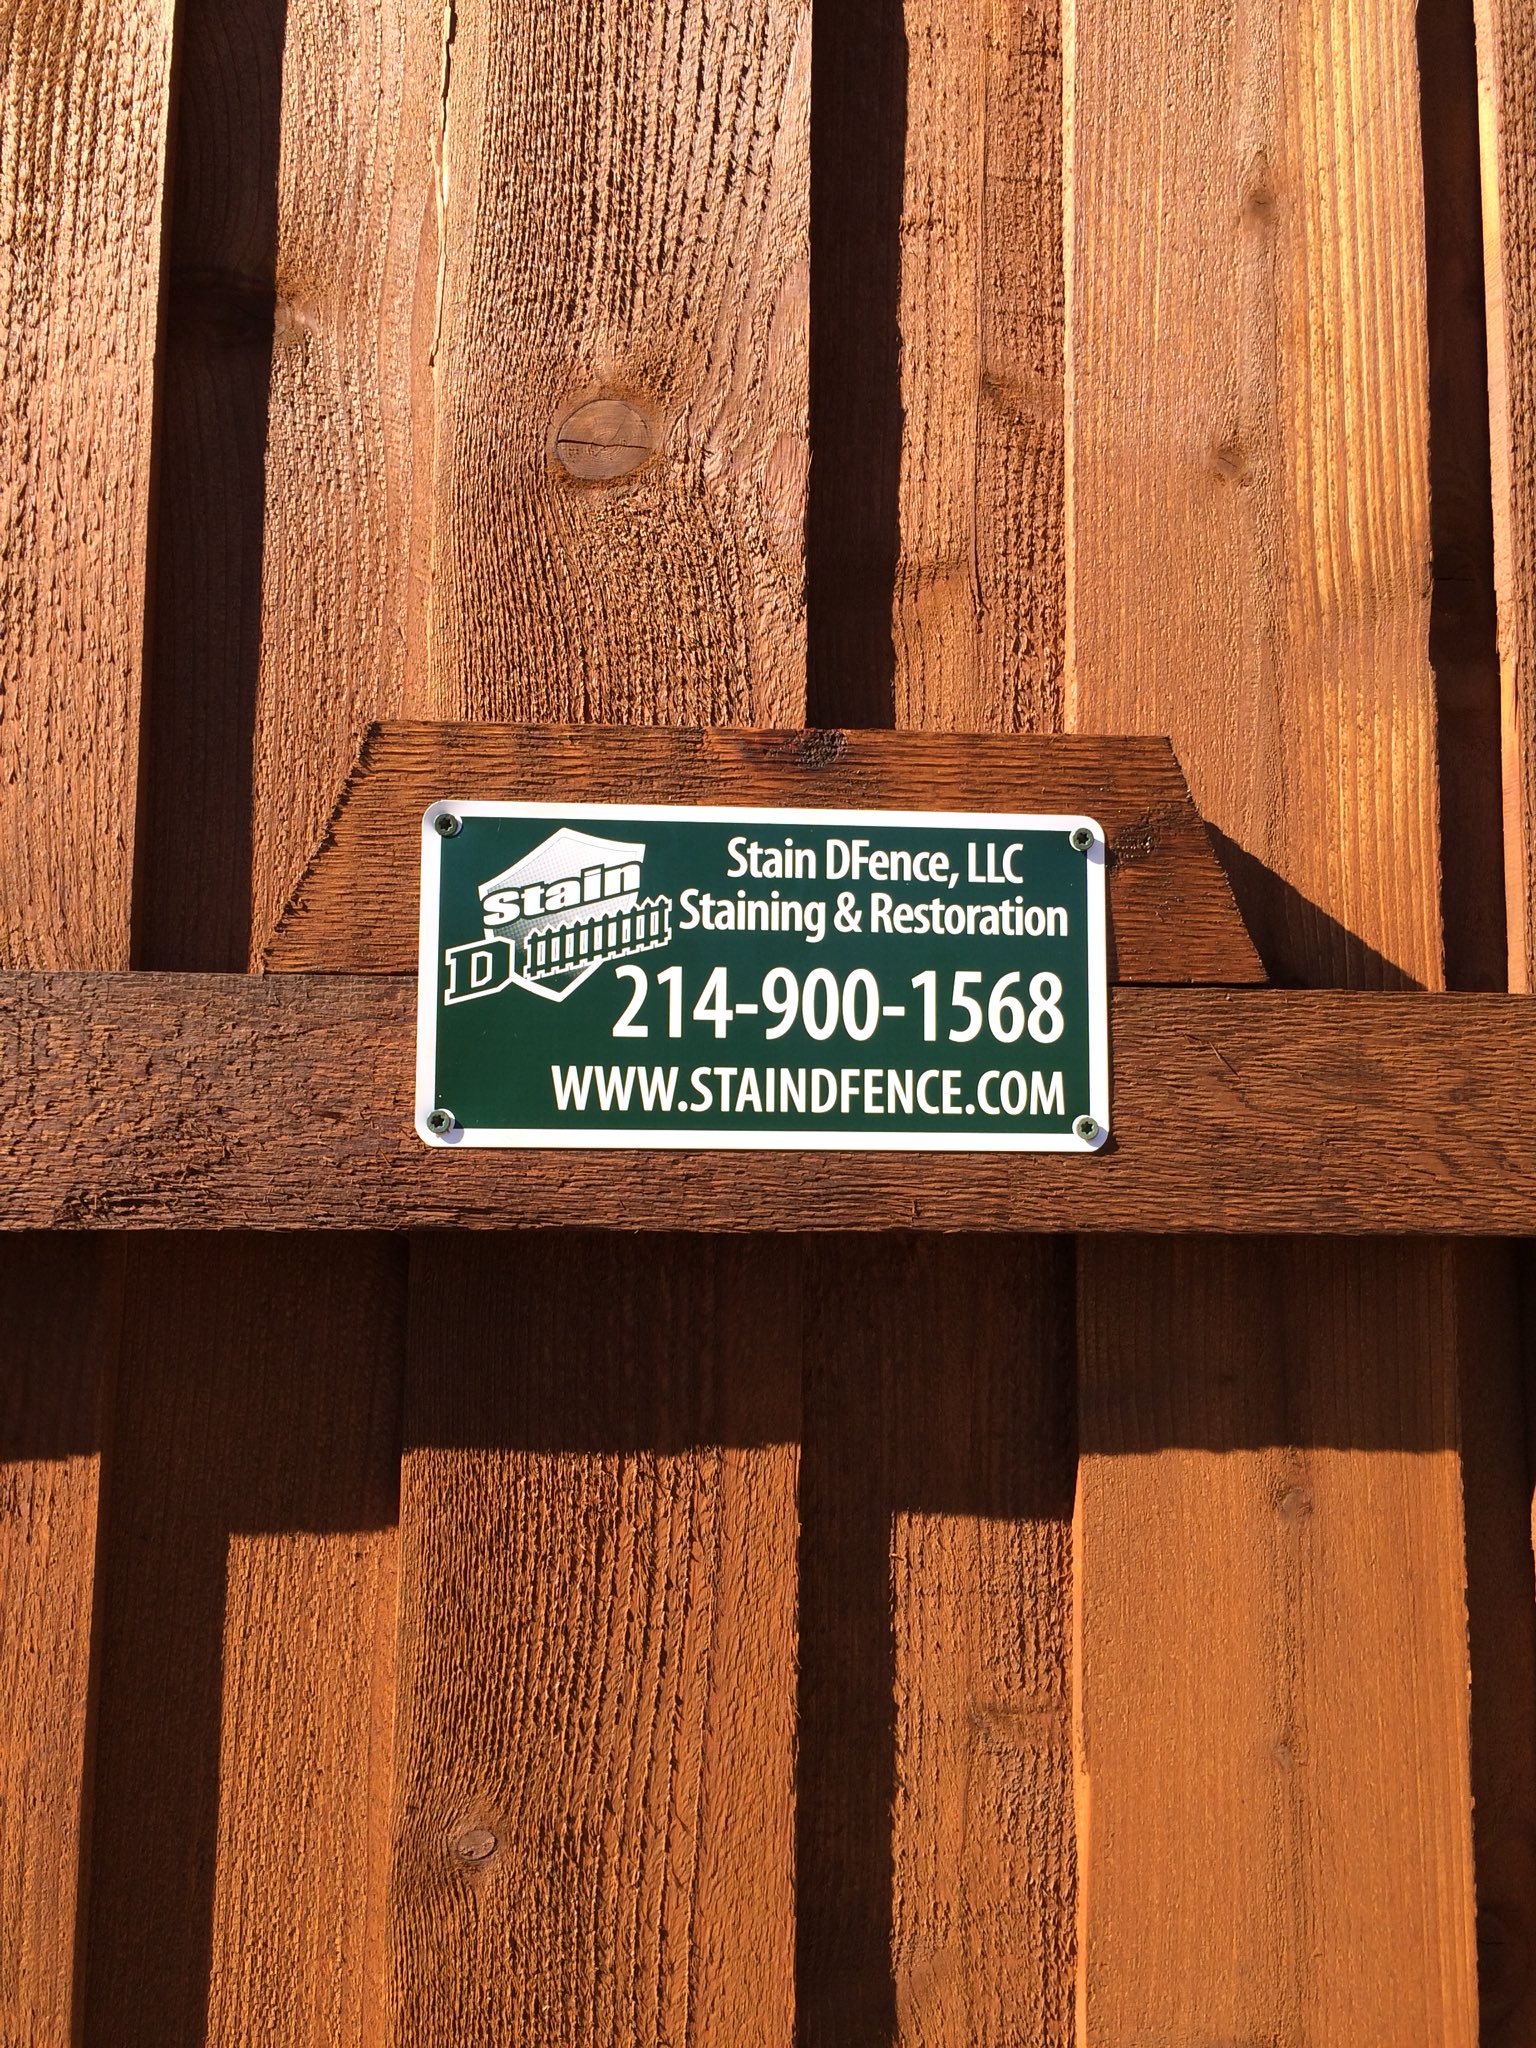 Stain Wooden Fence Estimate - Stain DFence